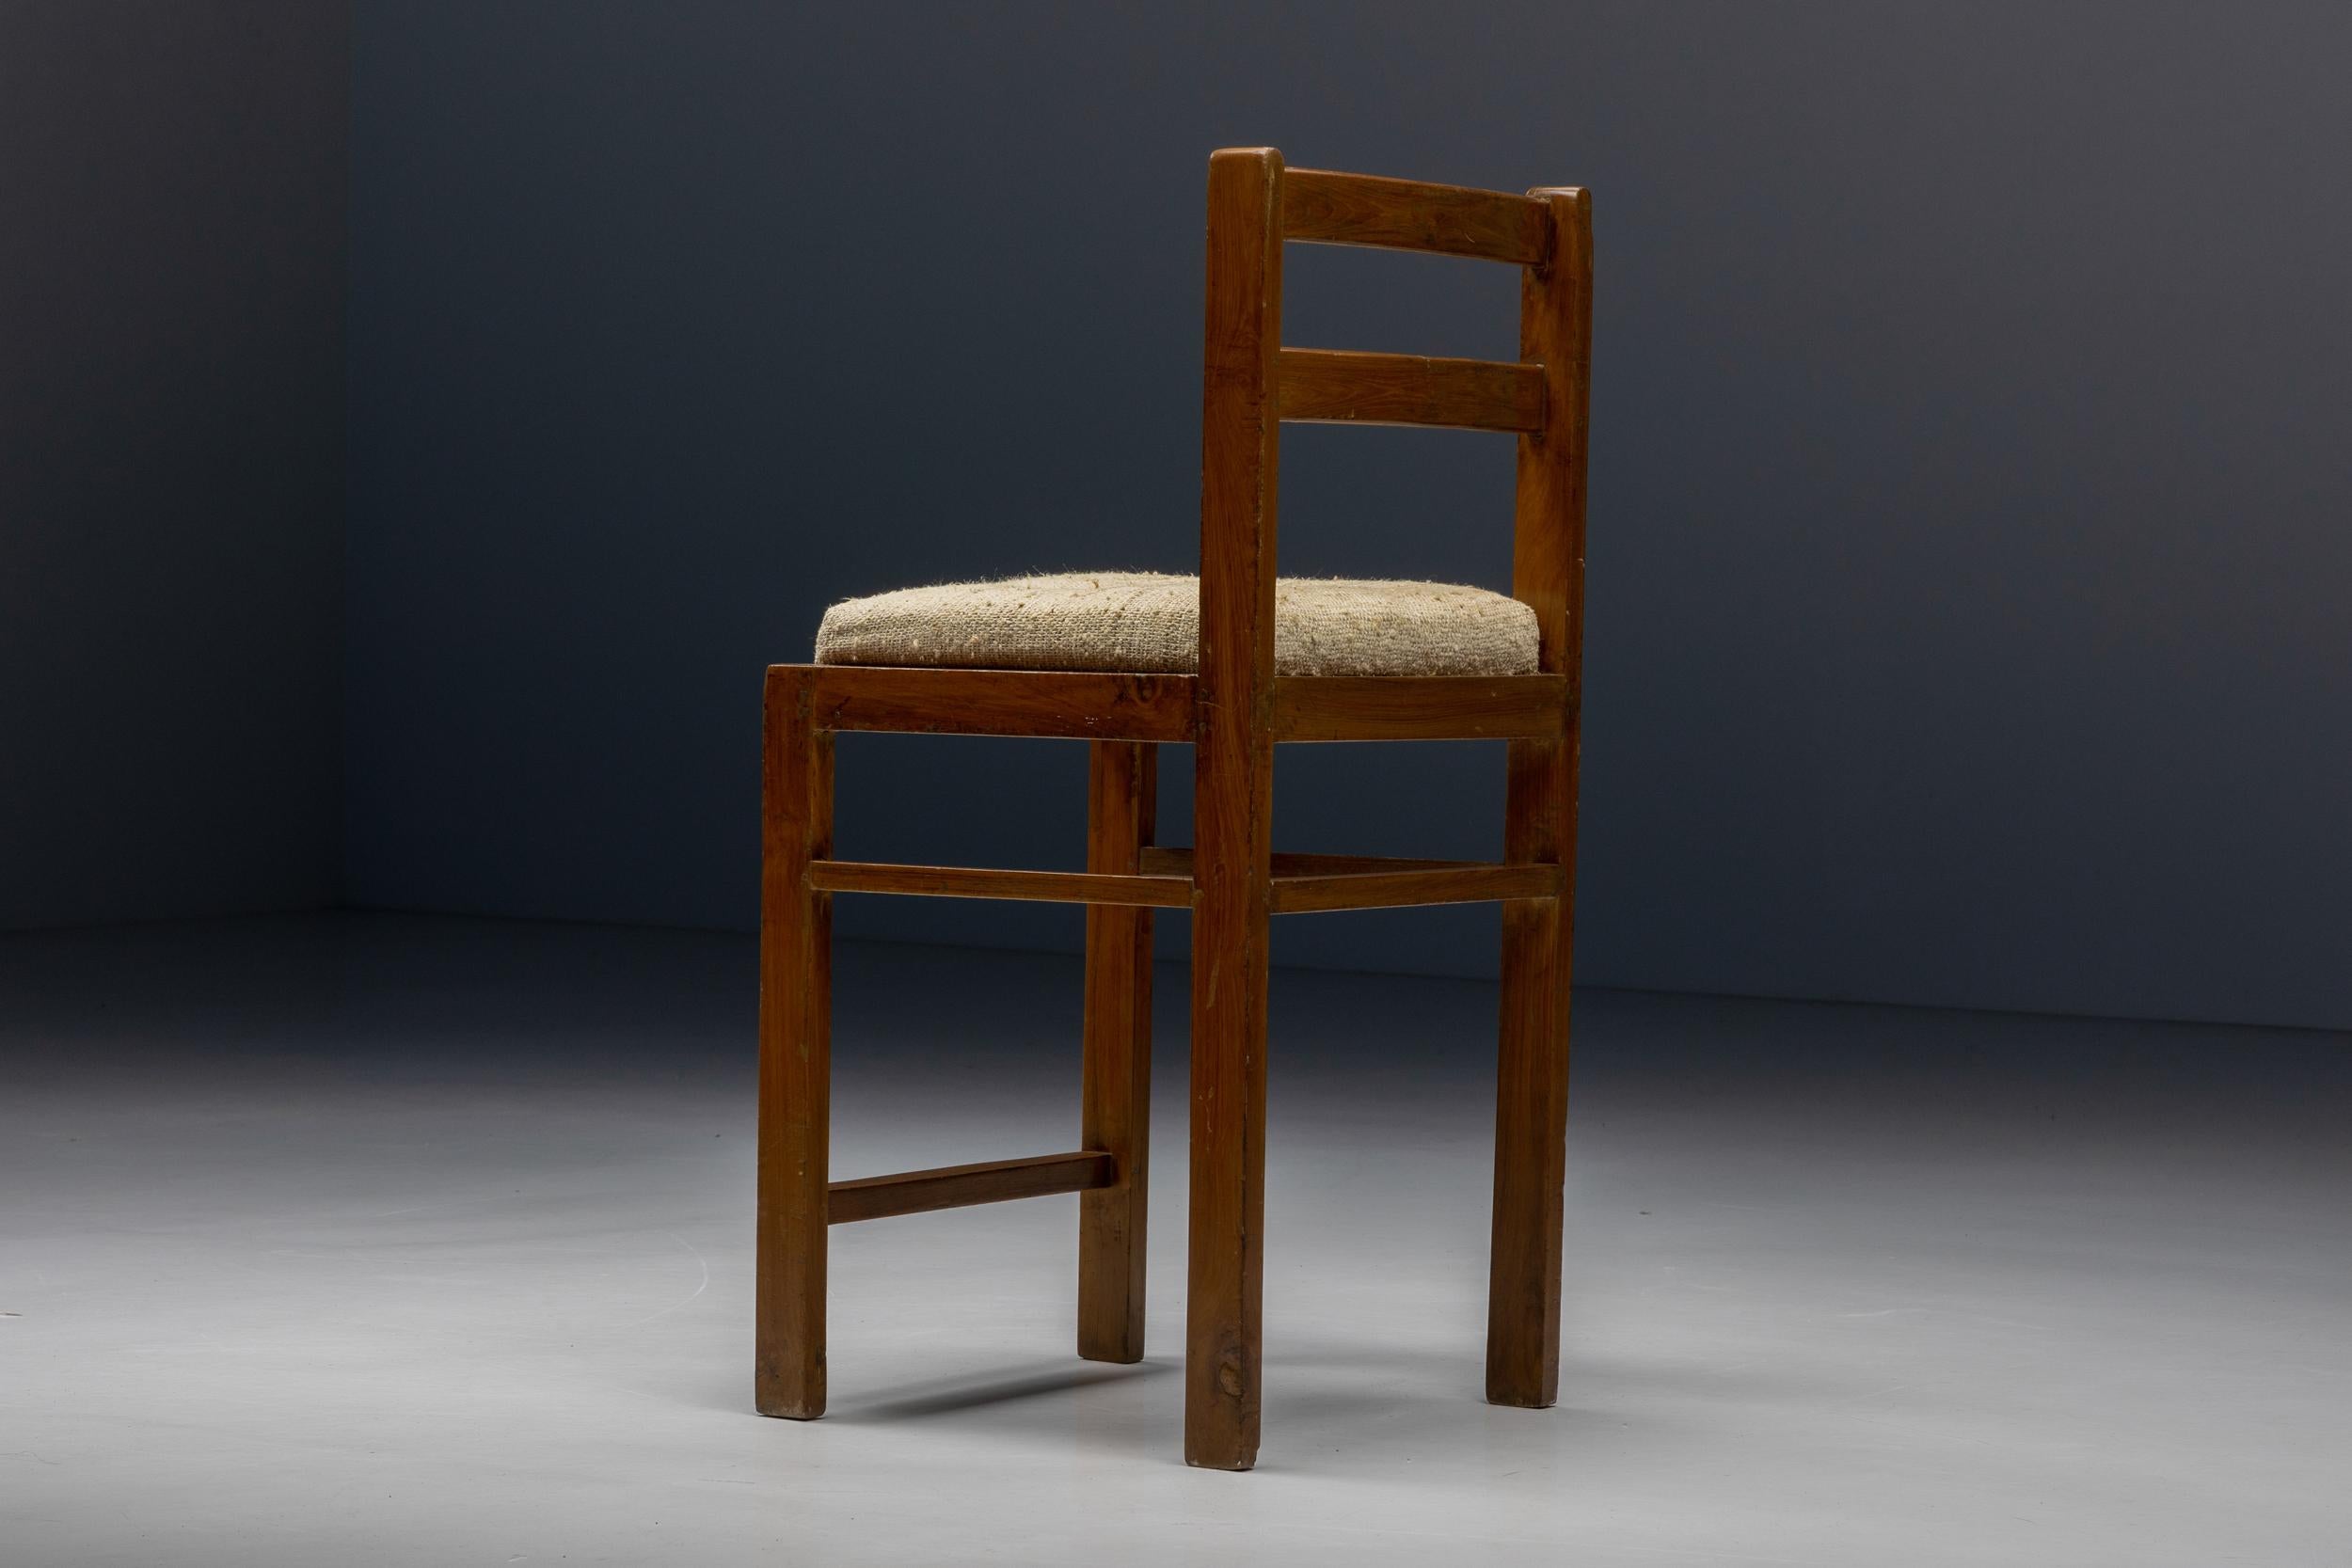 20th Century Pierre Jeanneret Chandigarh Prototype Stool, Woven Linen Seating, India, 1960's For Sale